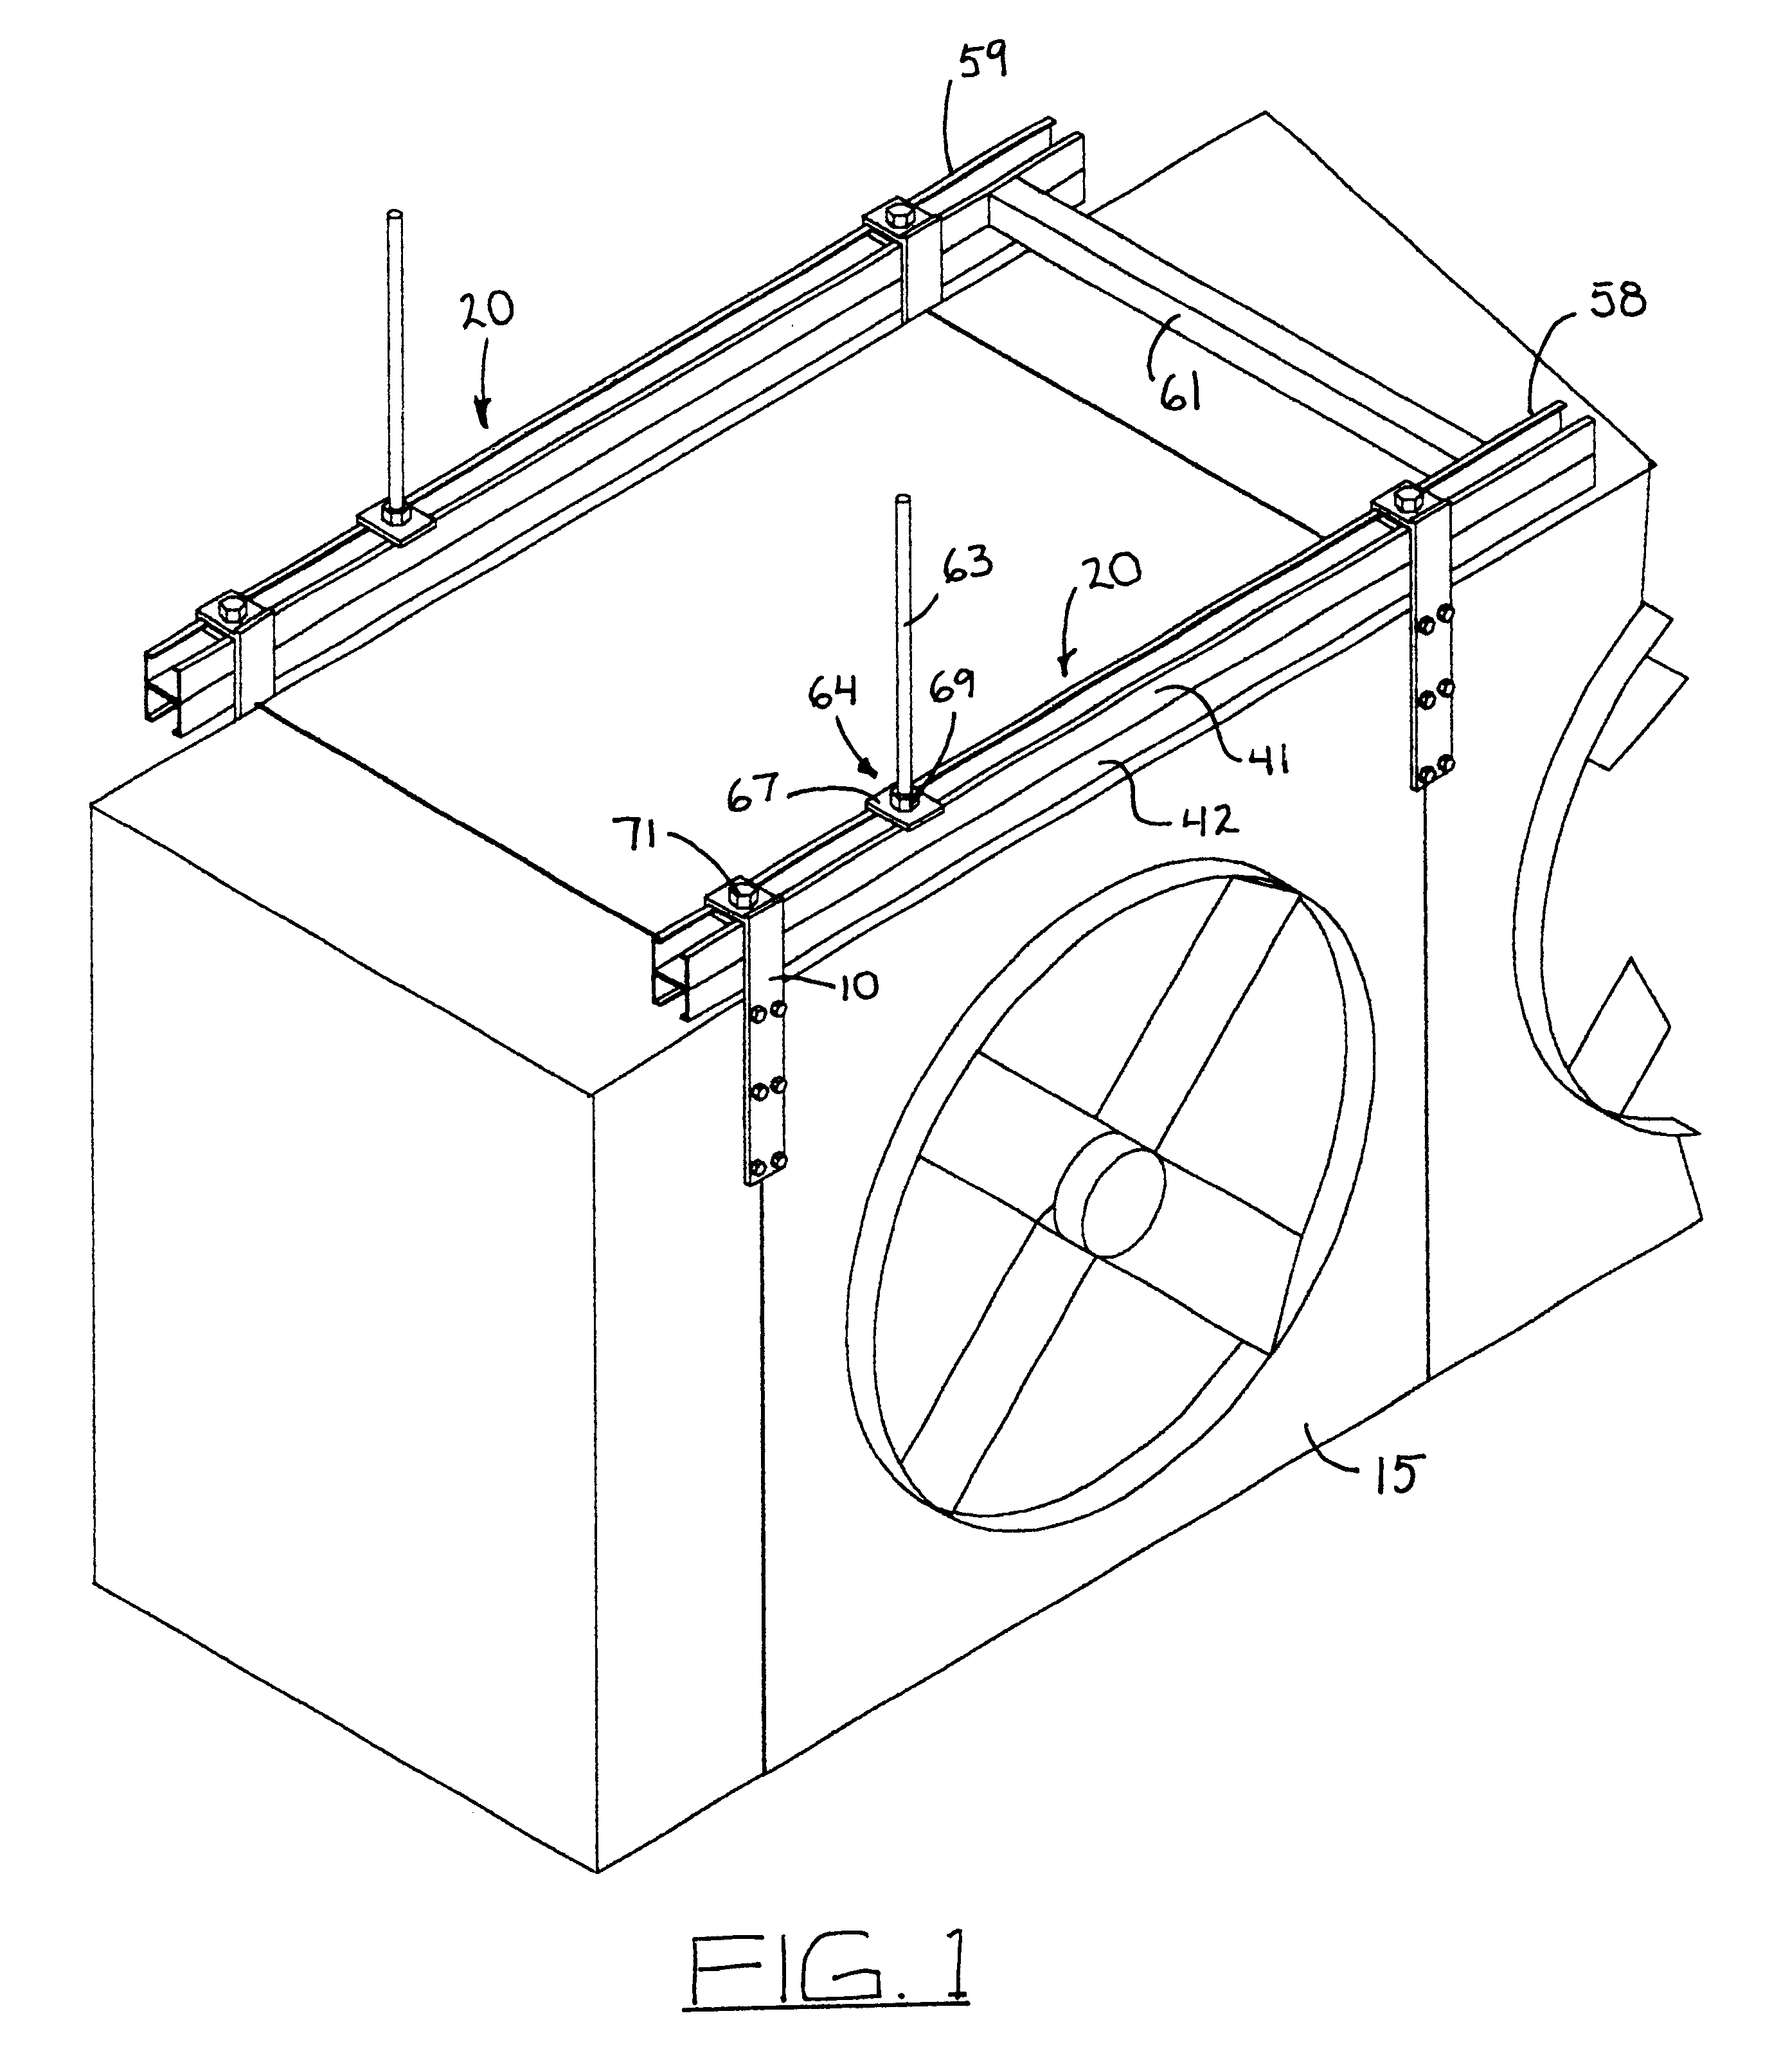 Hanger bracket for installing and supporting suspended equipment